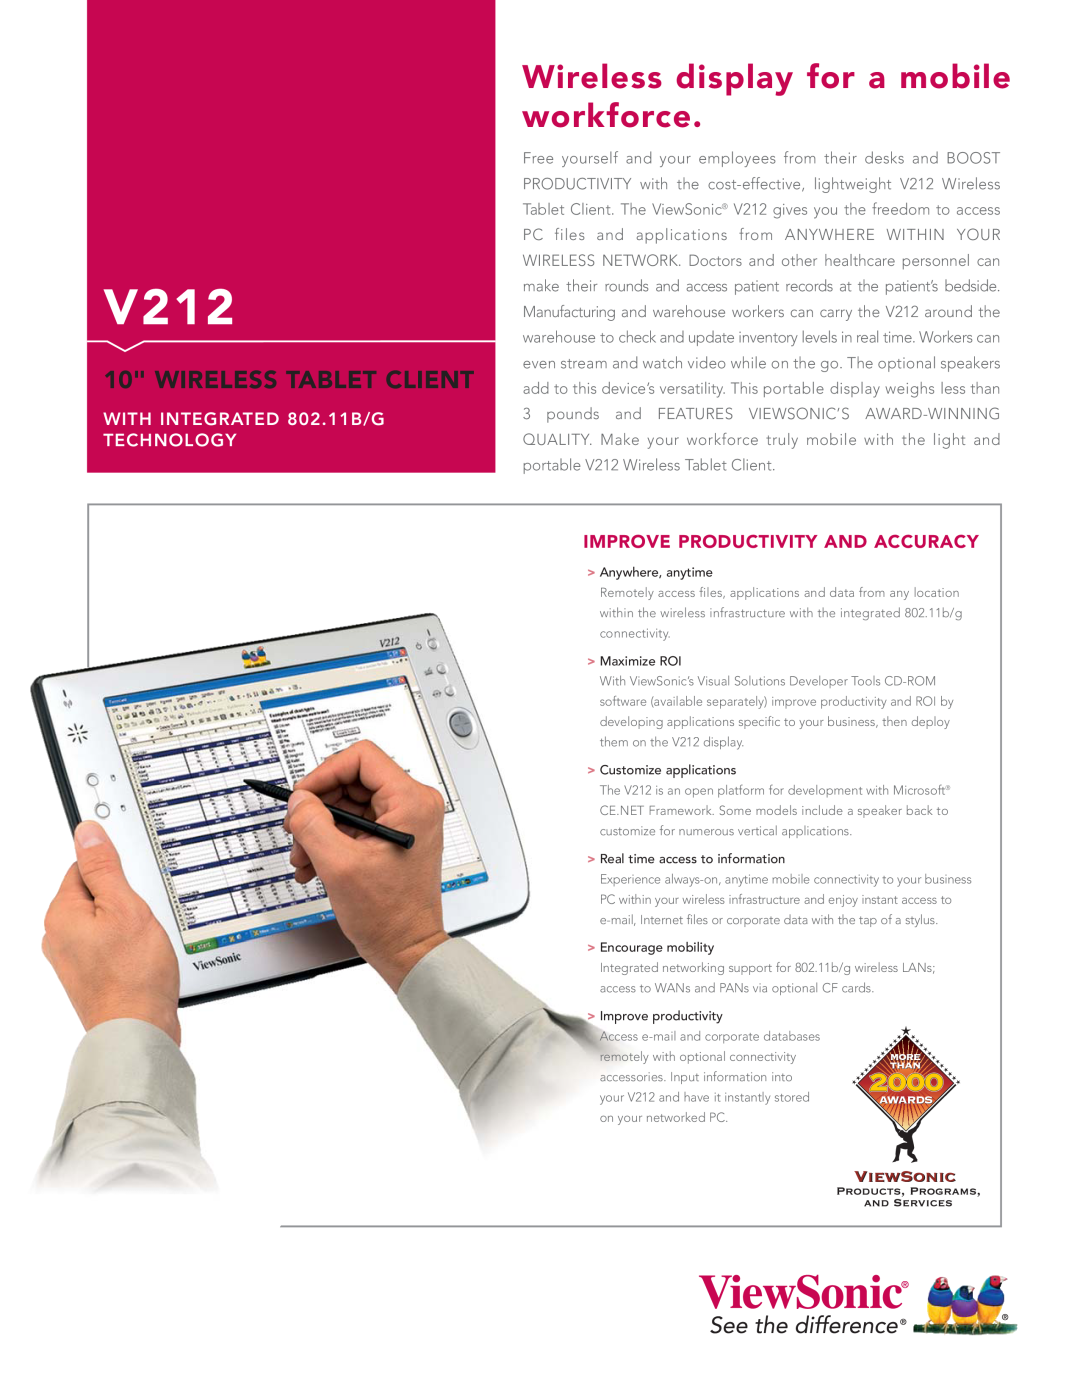 ViewSonic V212 manual Wireless display for a mobile workforce, Wireless Tablet Client, Improve Productivity And Accuracy 